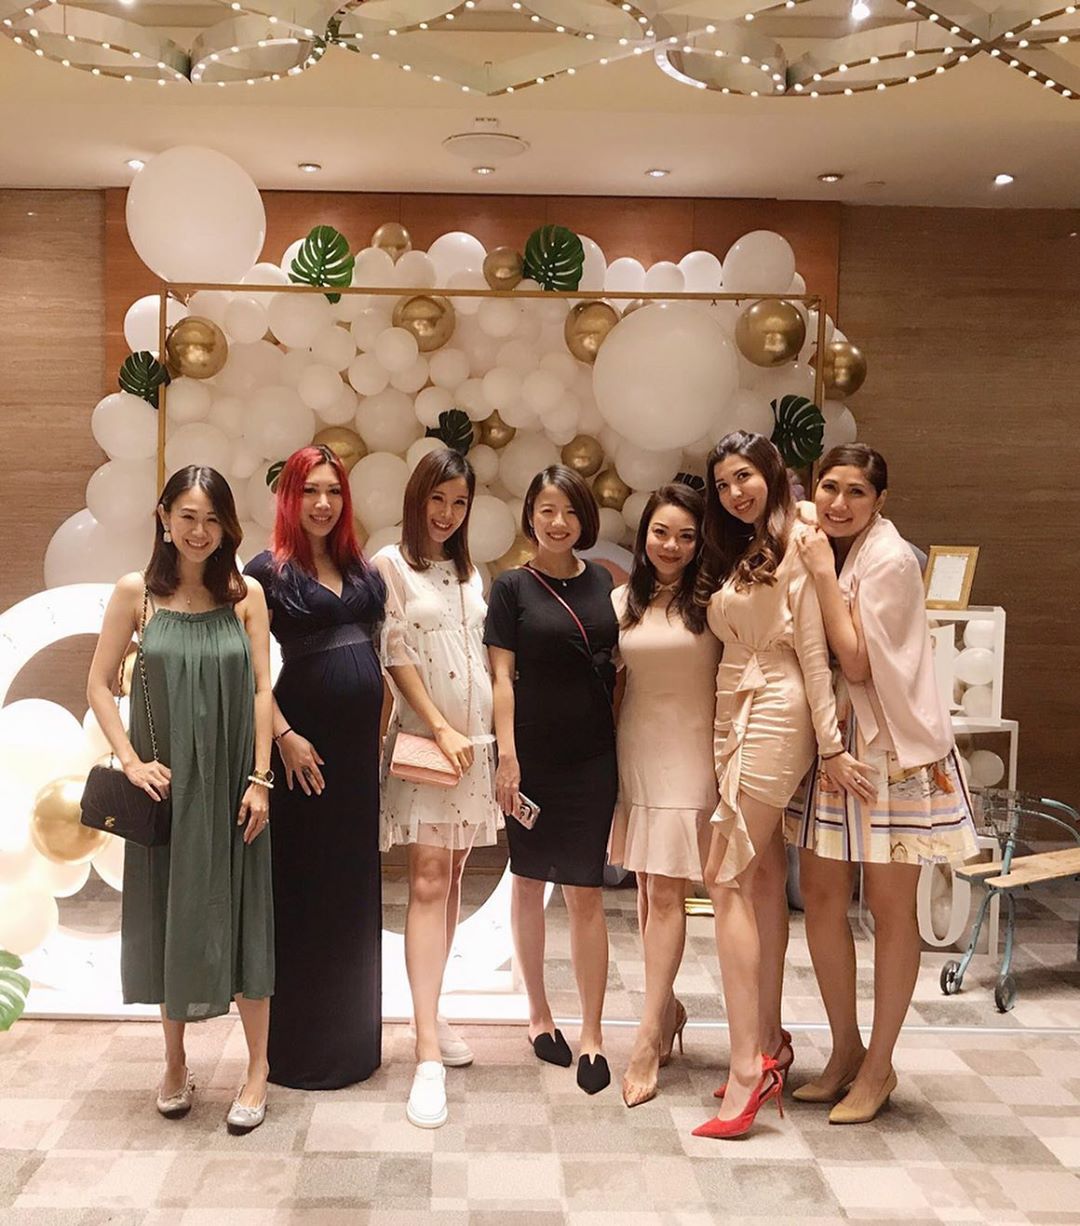 Some of the guests included Zoe Raymond Tan, Jane Surin, Vanessa Tang and Zonia Raymond Tan Ng.